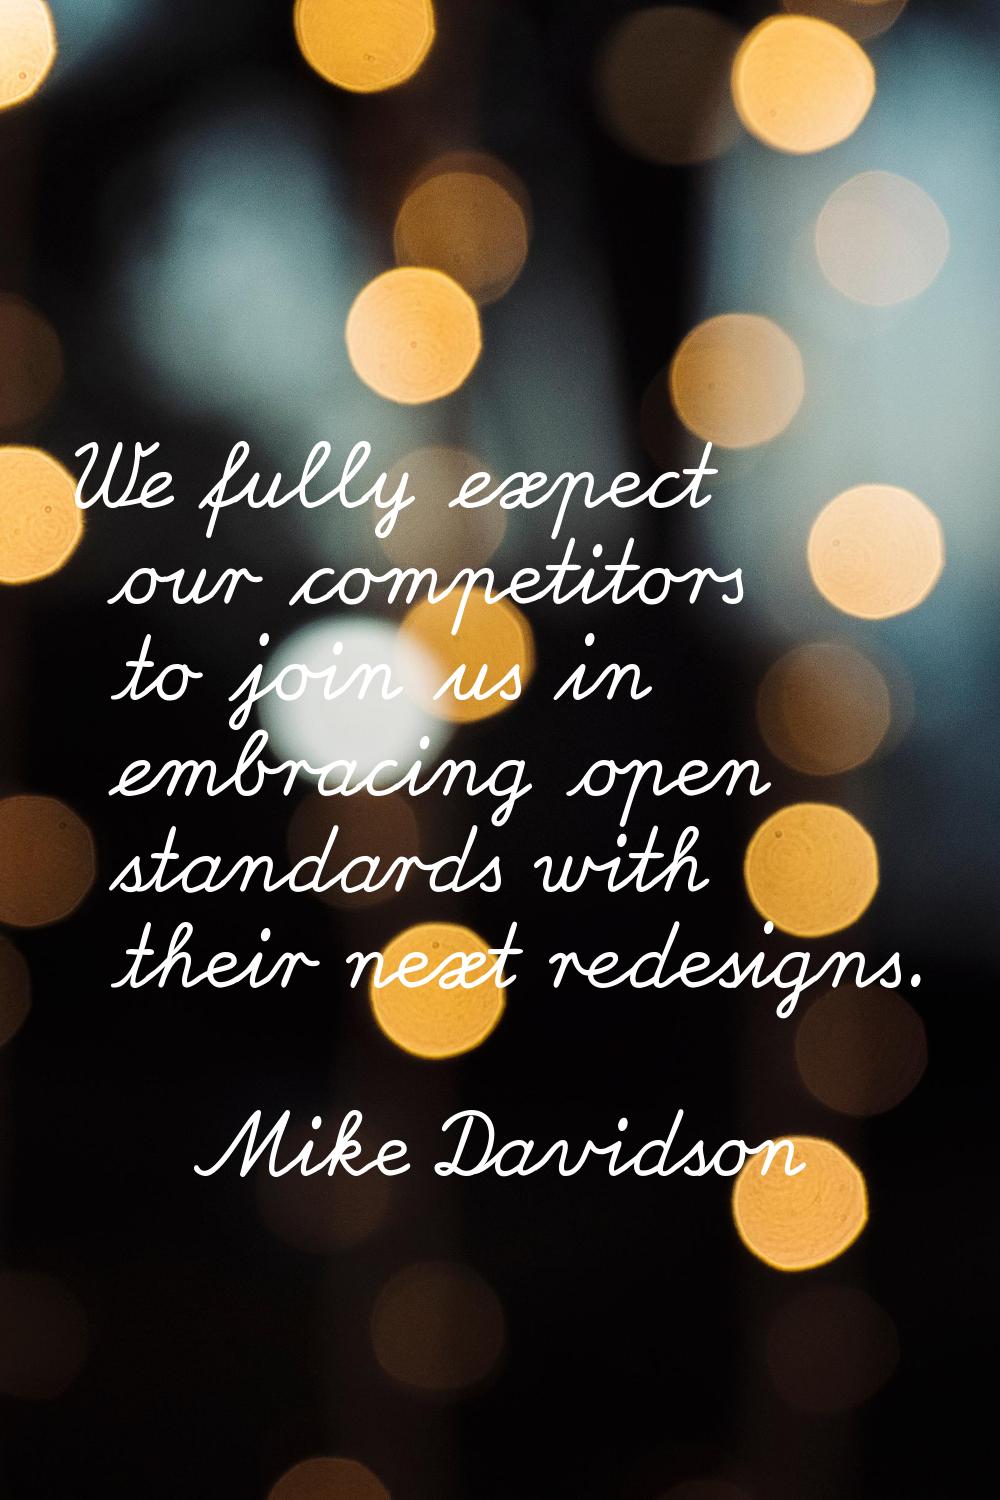 We fully expect our competitors to join us in embracing open standards with their next redesigns.